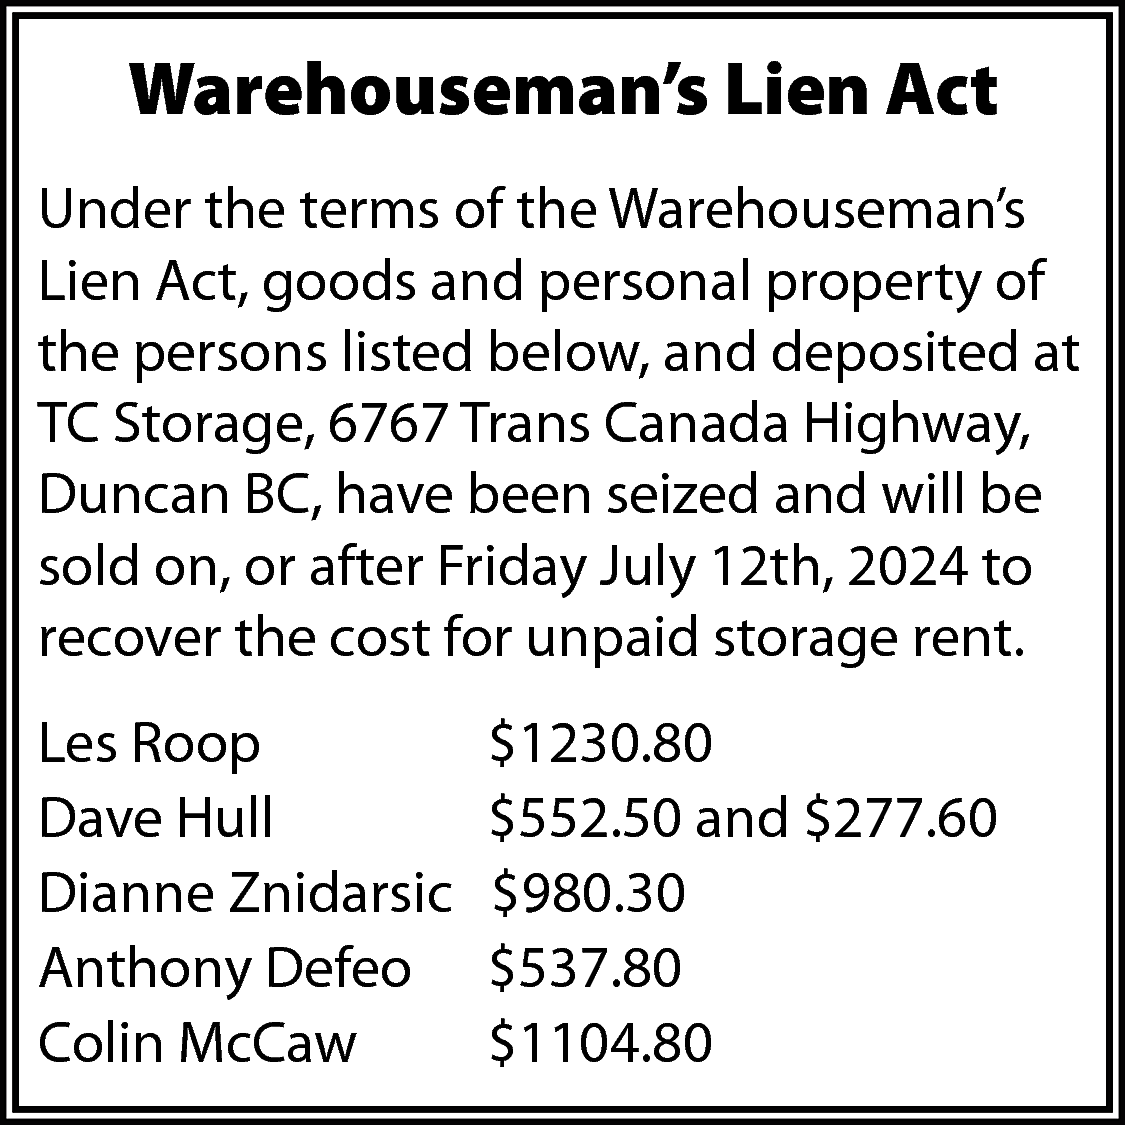 Warehouseman’s Lien Act <br>Under the  Warehouseman’s Lien Act  Under the terms of the Warehouseman’s  Lien Act, goods and personal property of  the persons listed below, and deposited at  TC Storage, 6767 Trans Canada Highway,  Duncan BC, have been seized and will be  sold on, or after Friday July 12th, 2024 to  recover the cost for unpaid storage rent.  Les Roop  Dave Hull  Dianne Znidarsic  Anthony Defeo  Colin McCaw    $1230.80  $552.50 and $277.60  $980.30  $537.80  $1104.80    